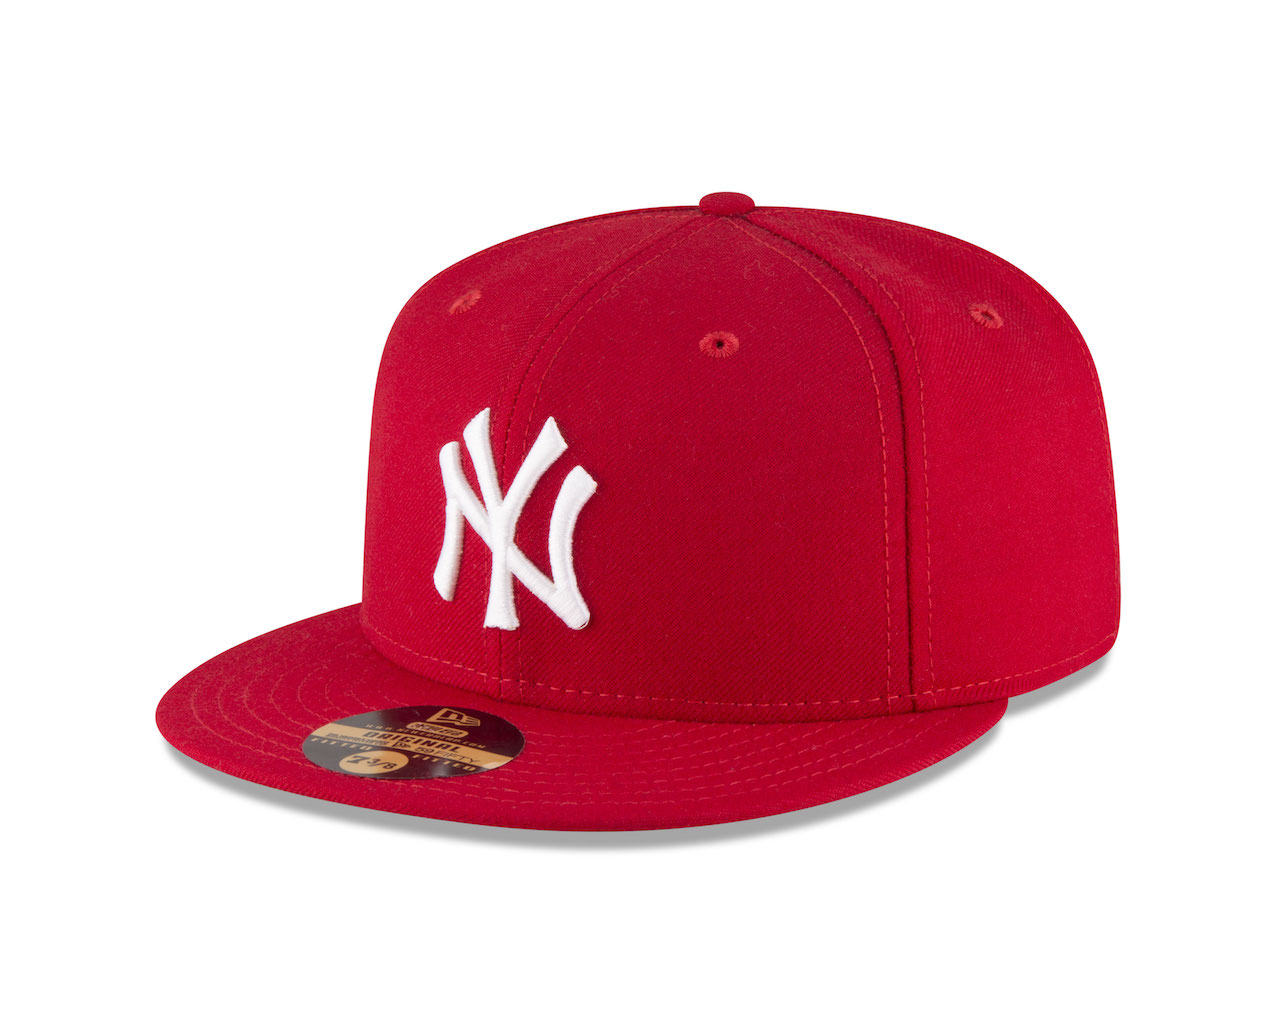 New Era 59FIFTY style New York Yankee Scarlet fitted cap. 1996. Size 7 ⅜. Wool cap with embroidered interlocking NY front logo. Yankees Top Hat logo rear embroidery. Made in the U.S.A (Buffalo, N.Y.) An original example of the first red cap ordered by request from Spike Lee to wear at game 3 of the 1996 world series playoffs